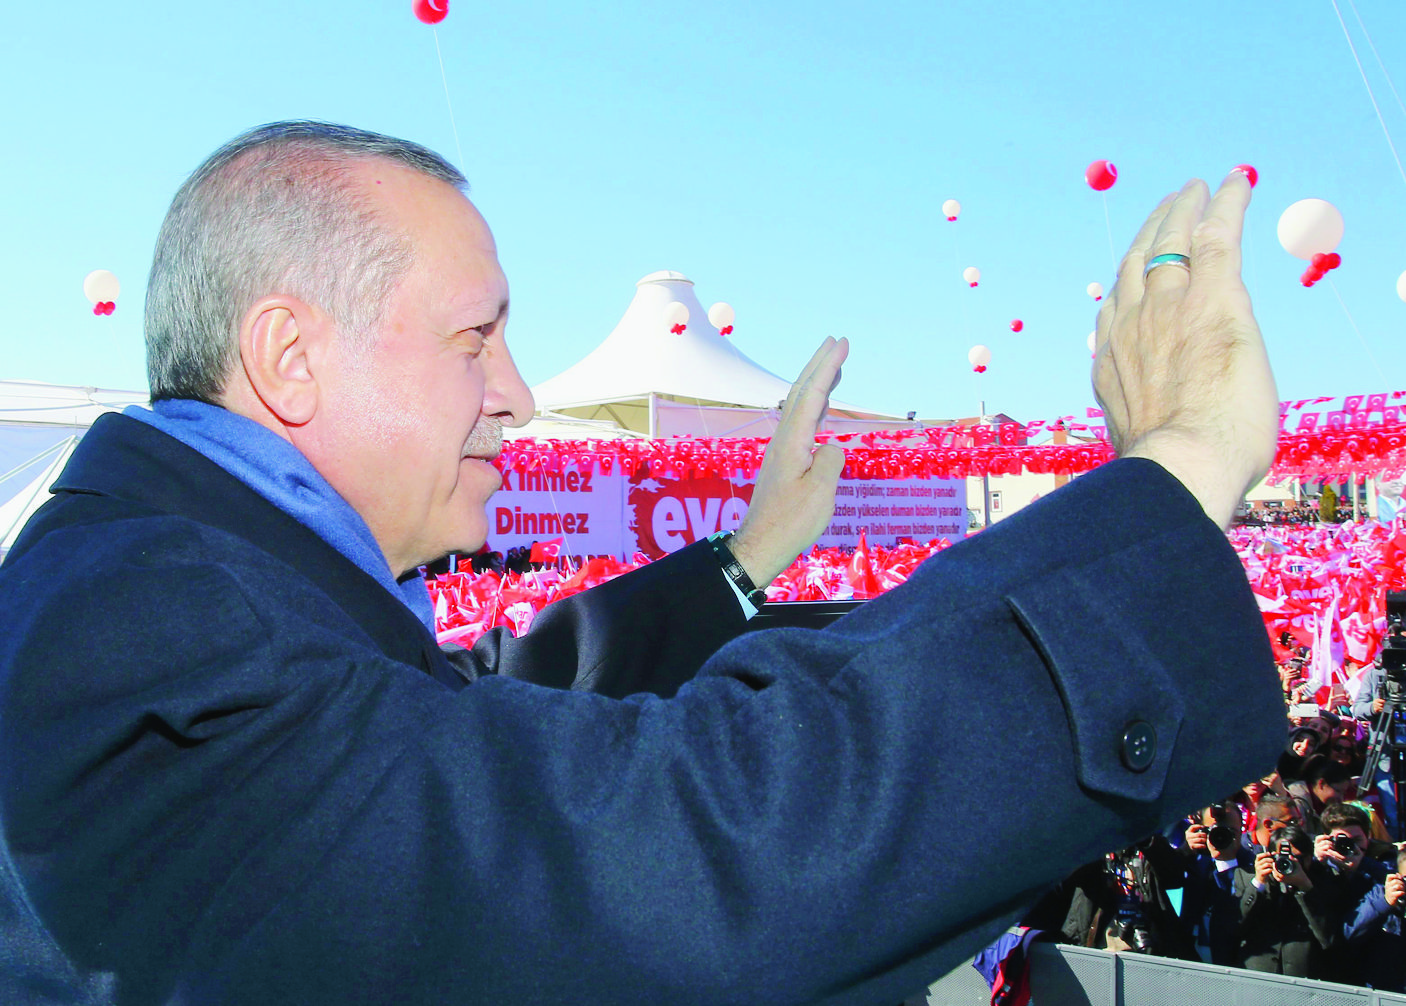 Turkey's President Recep Tayyip Erdogan addresses his supporters in Kastamonu, Turkey, Wednesday, March 22, 2017. Erdogan ramped up his anti-European rhetoric on Wednesday, warning that the safety of Western citizens could be in peril if European nations persist in what he described as arrogant conduct. Erdogan's remarks came amid tension over Dutch and German restrictions on Turkish officials who tried to campaign for diaspora votes ahead of an April 16 referendum on expanding the powers of the Turkish presidency. (Kayhan Ozer/Presidential Press Service, Pool Photo via AP) Turkey Europe